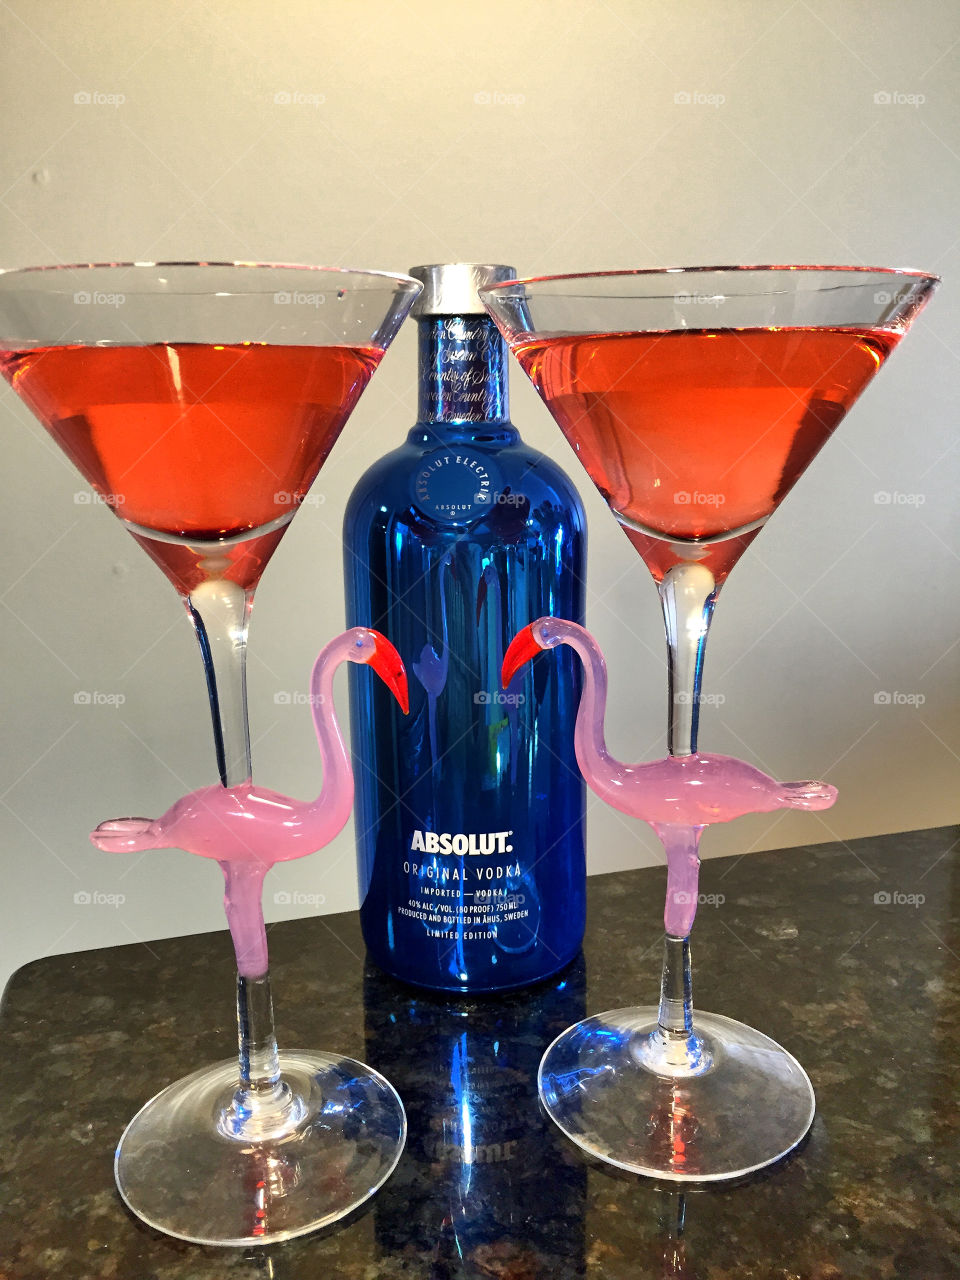 Absolut valentine's Day celebration for two!